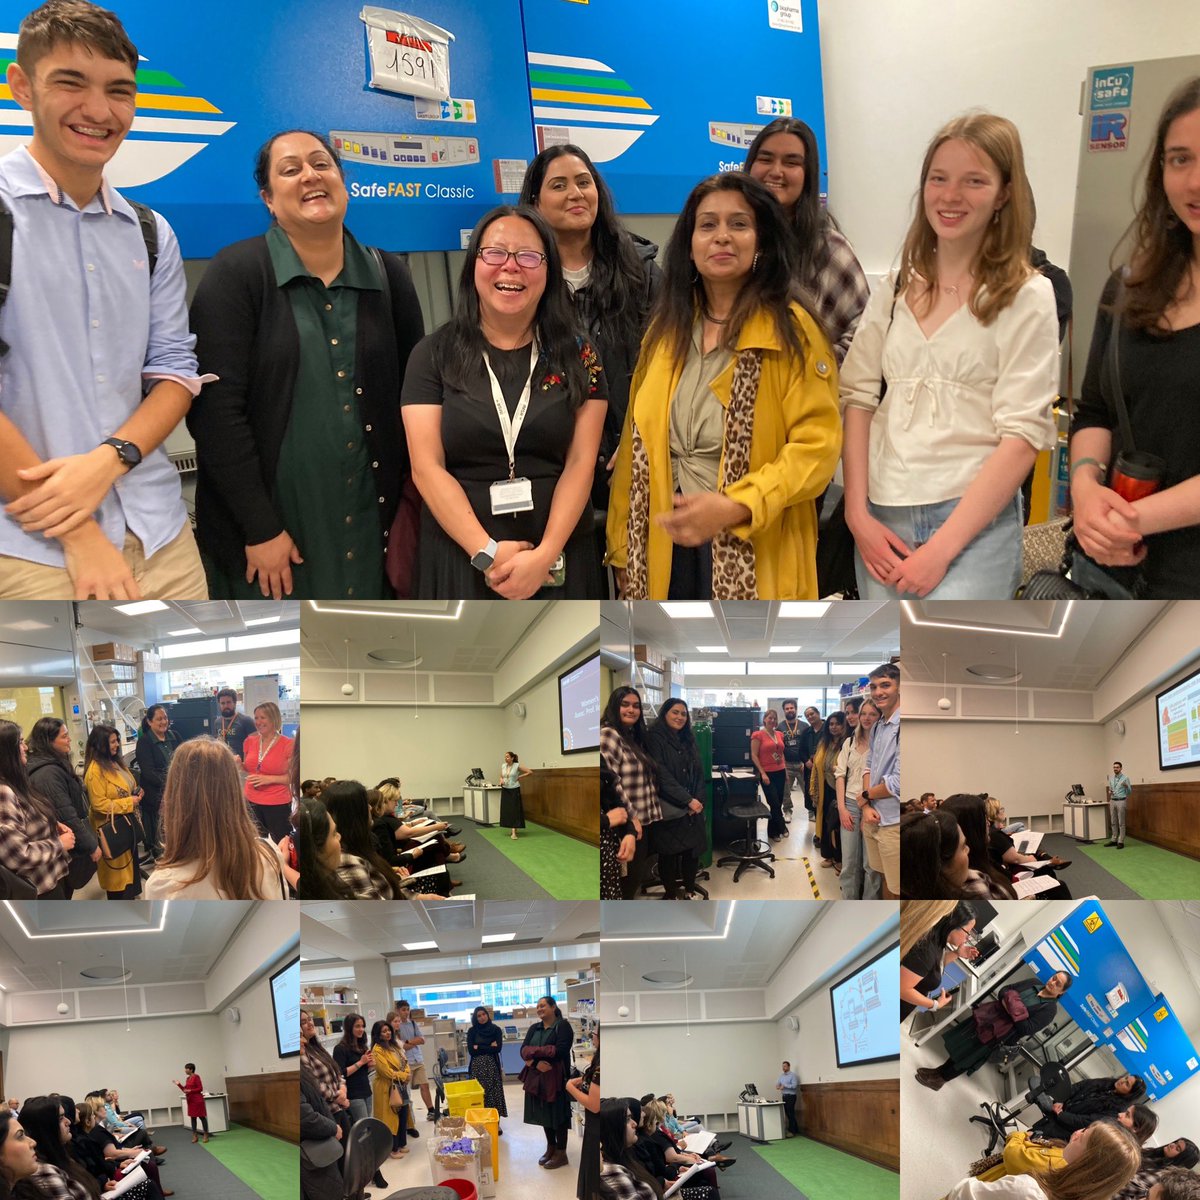 The @BirminghamBRC Women’s Metabolic Health theme had its launch today, with @thangaratinam providing an overview of ambitions ahead of research talks on #PCOS over the life course, experimental science & adrenal disorders. We also welcomed Hildas #PPIE partners & did a lab tour!